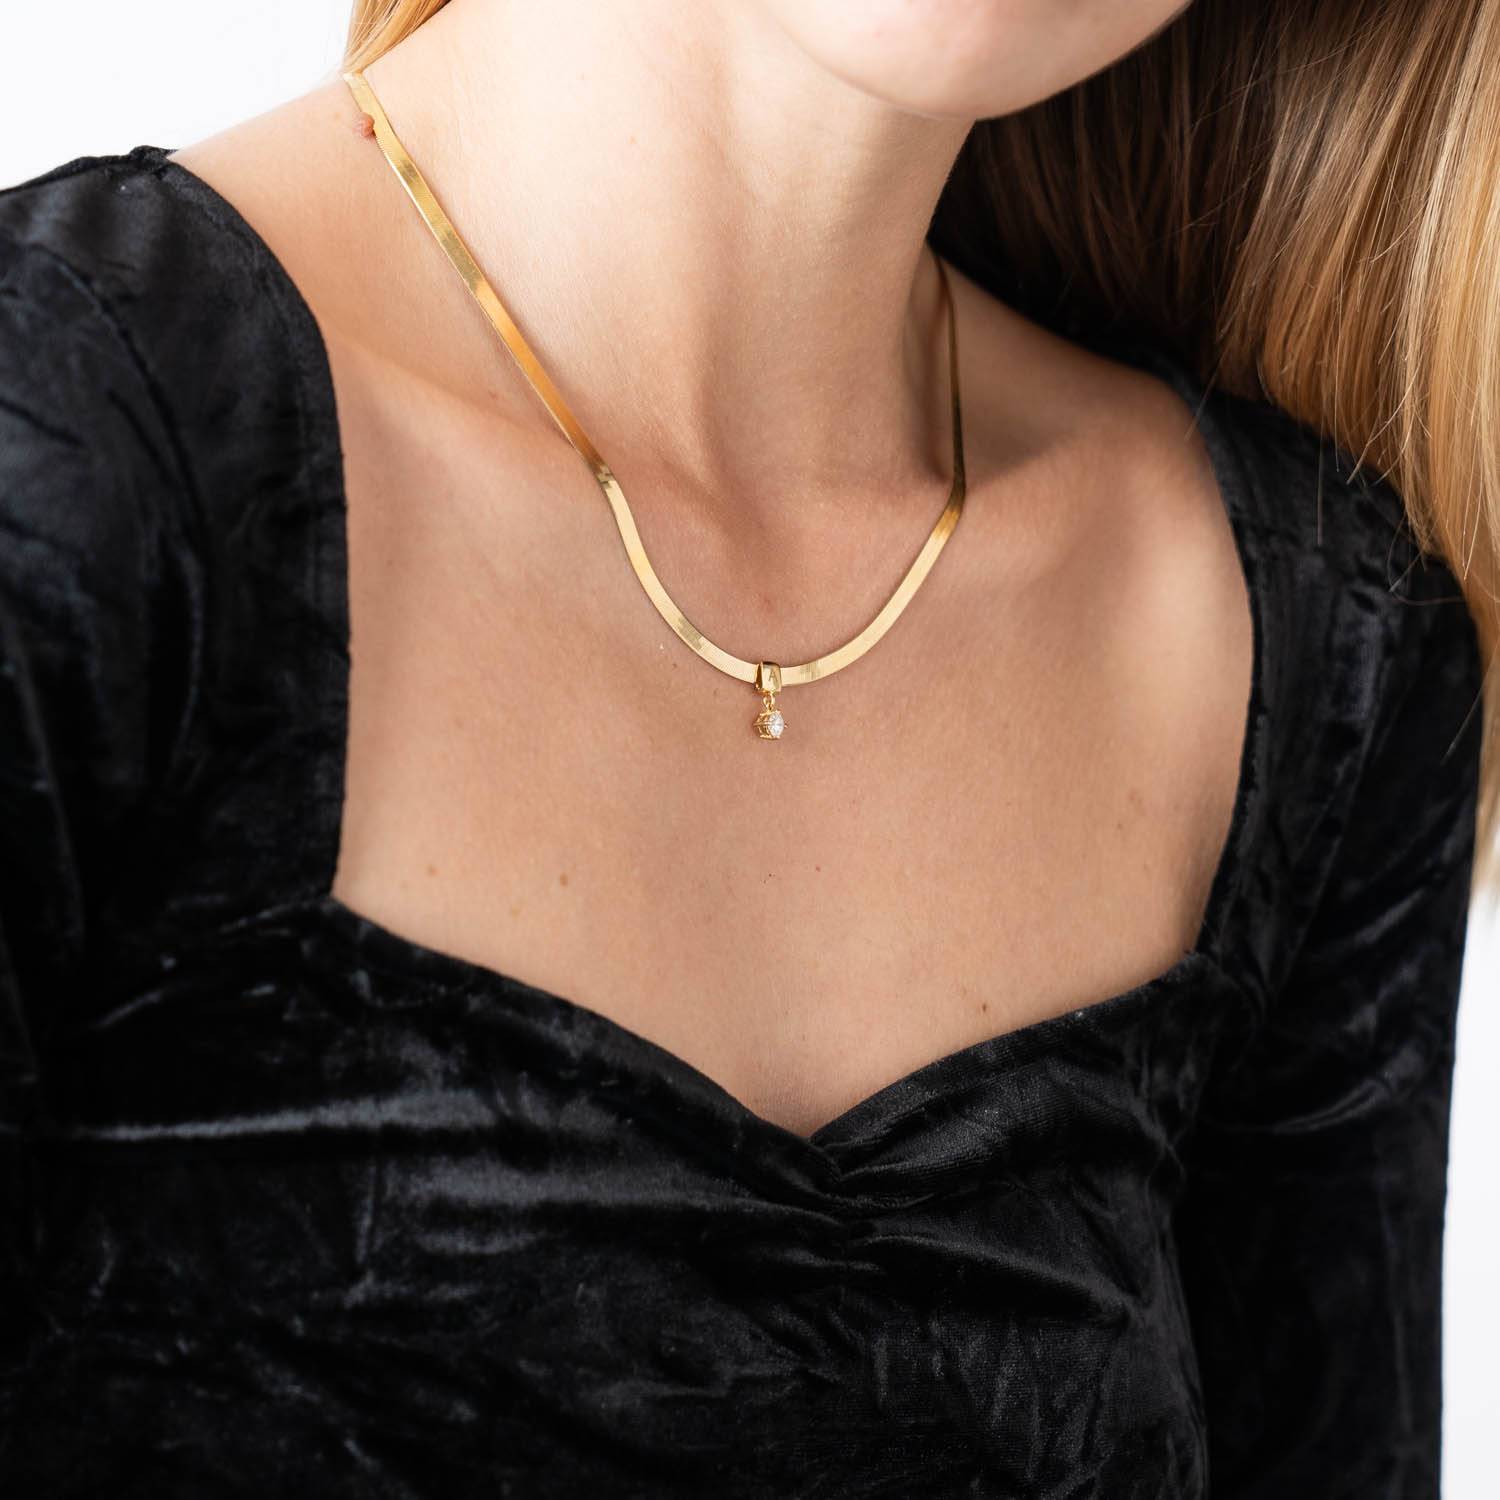 Herringbone Engraved Slim Chain Necklace - Gold Vermeil - Gift for Mom - Site - Engraved Necklace - Snake Necklace